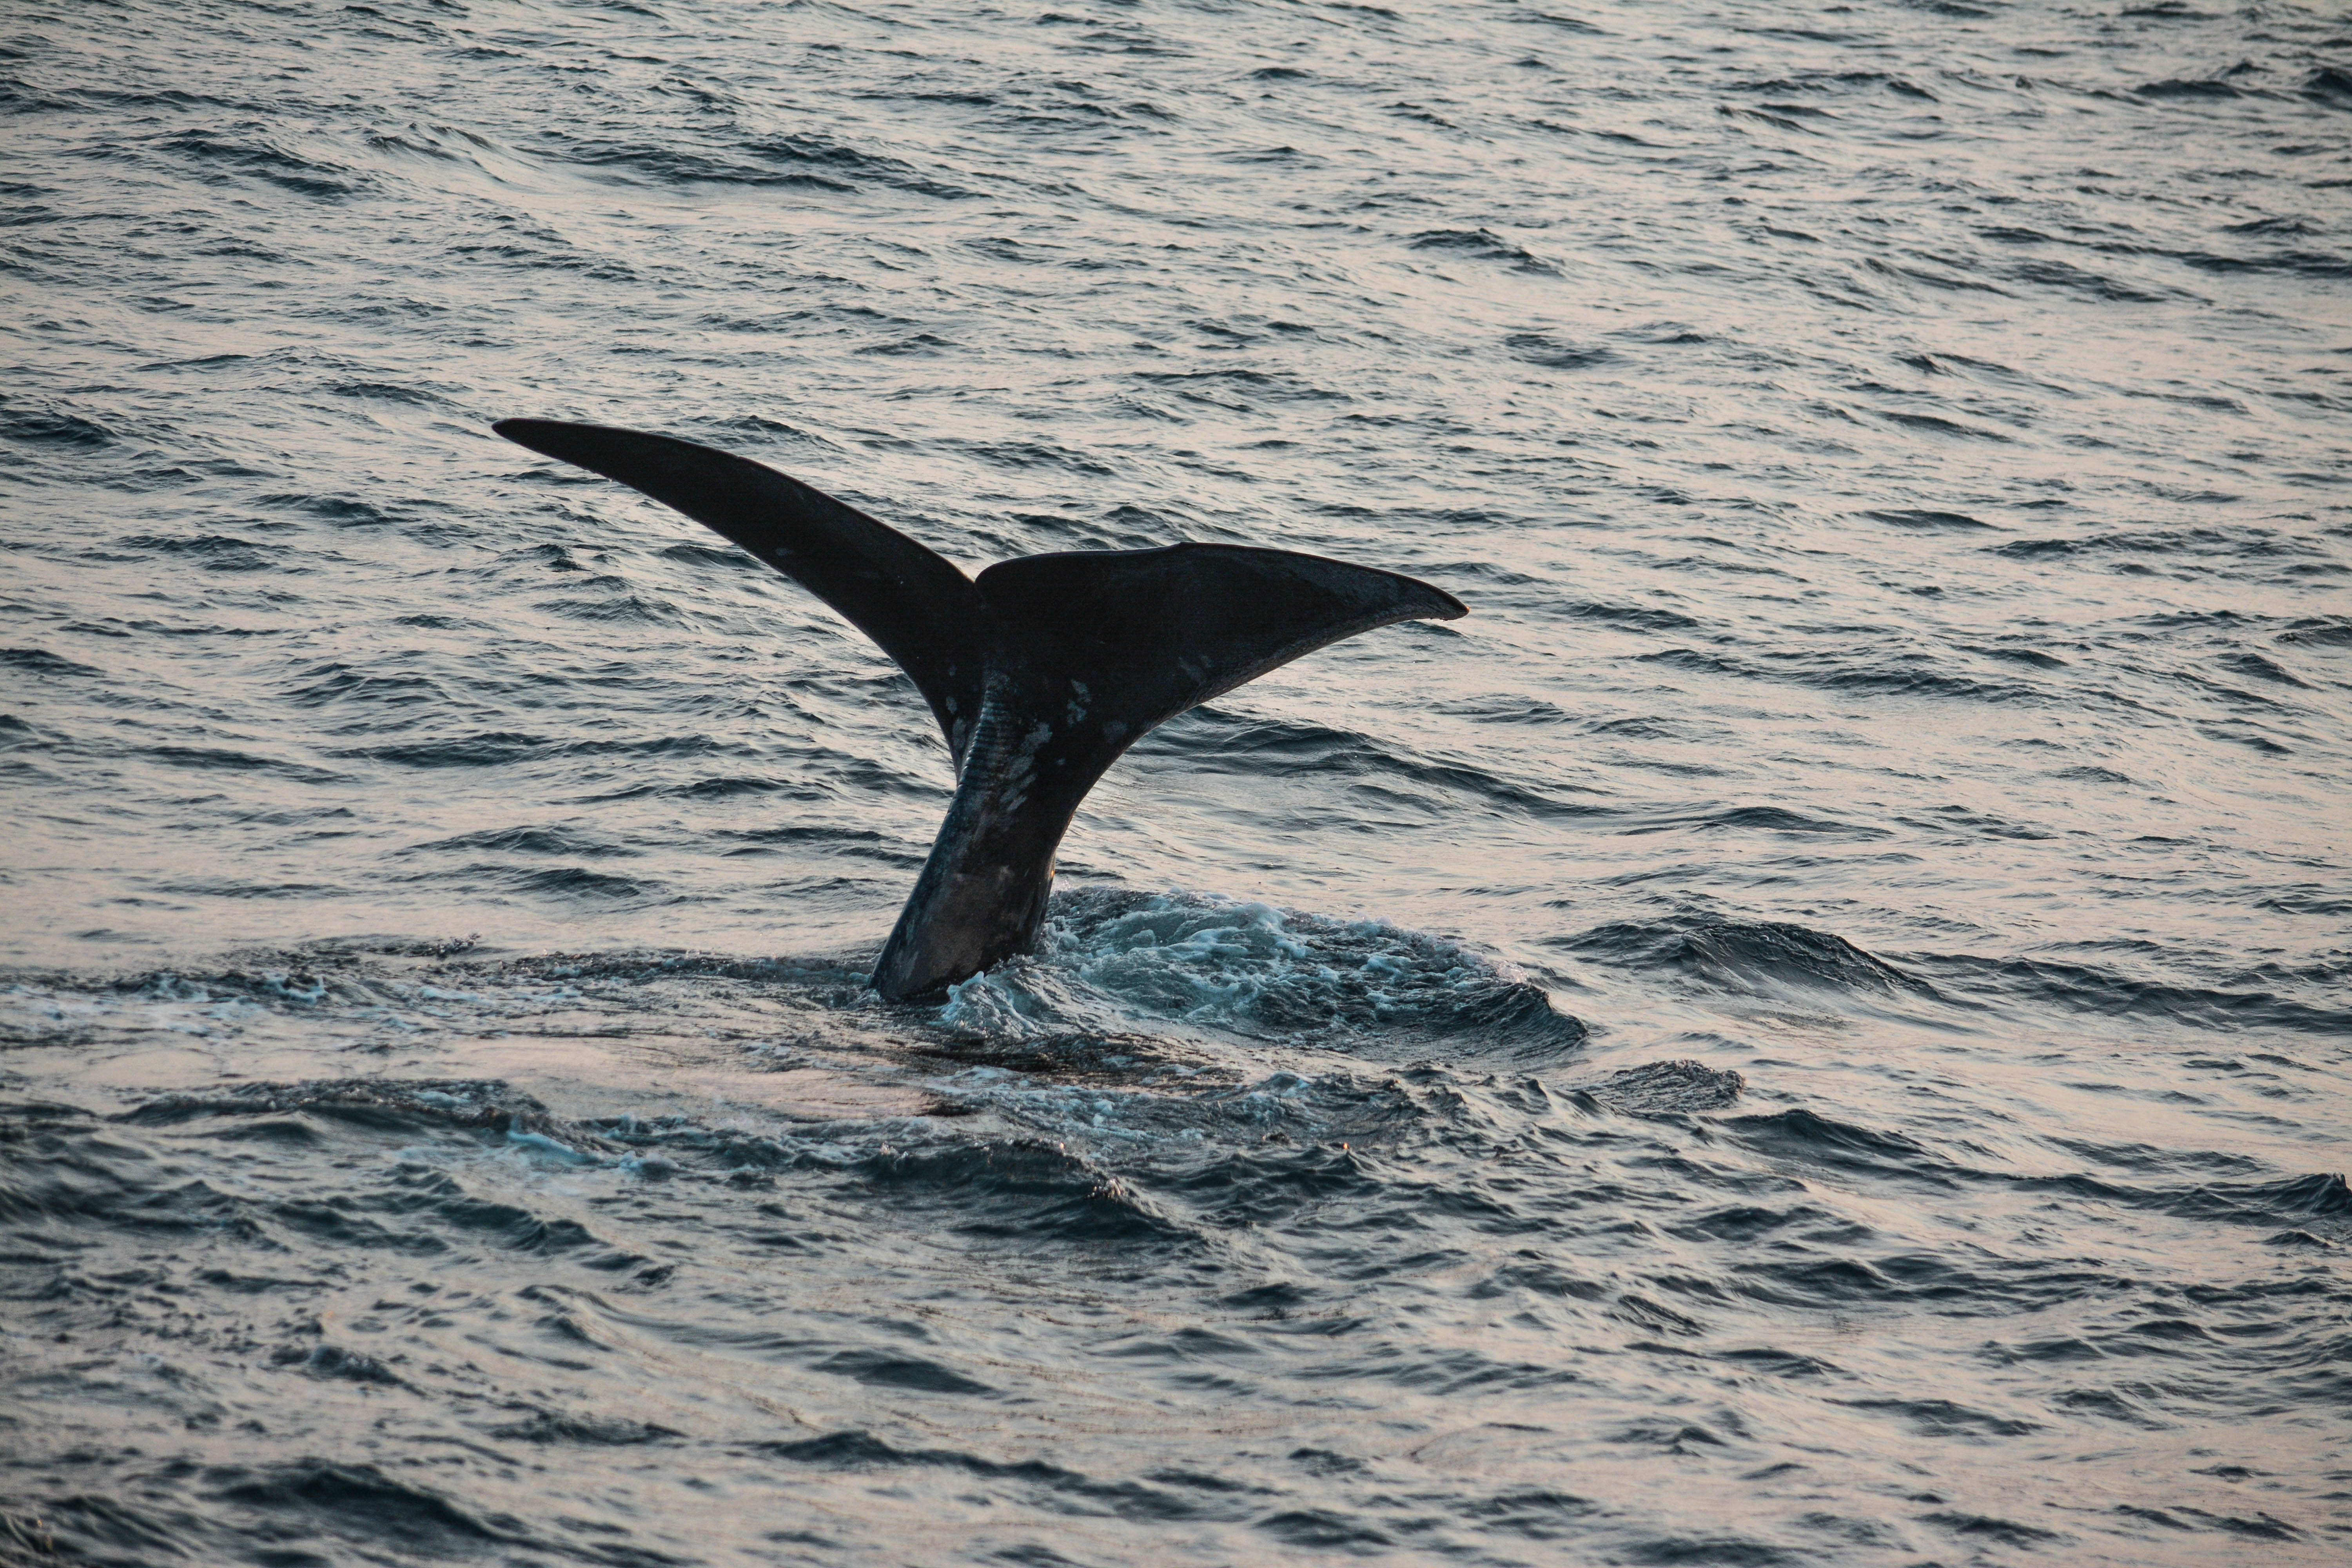 Whale Tail in the Ocean